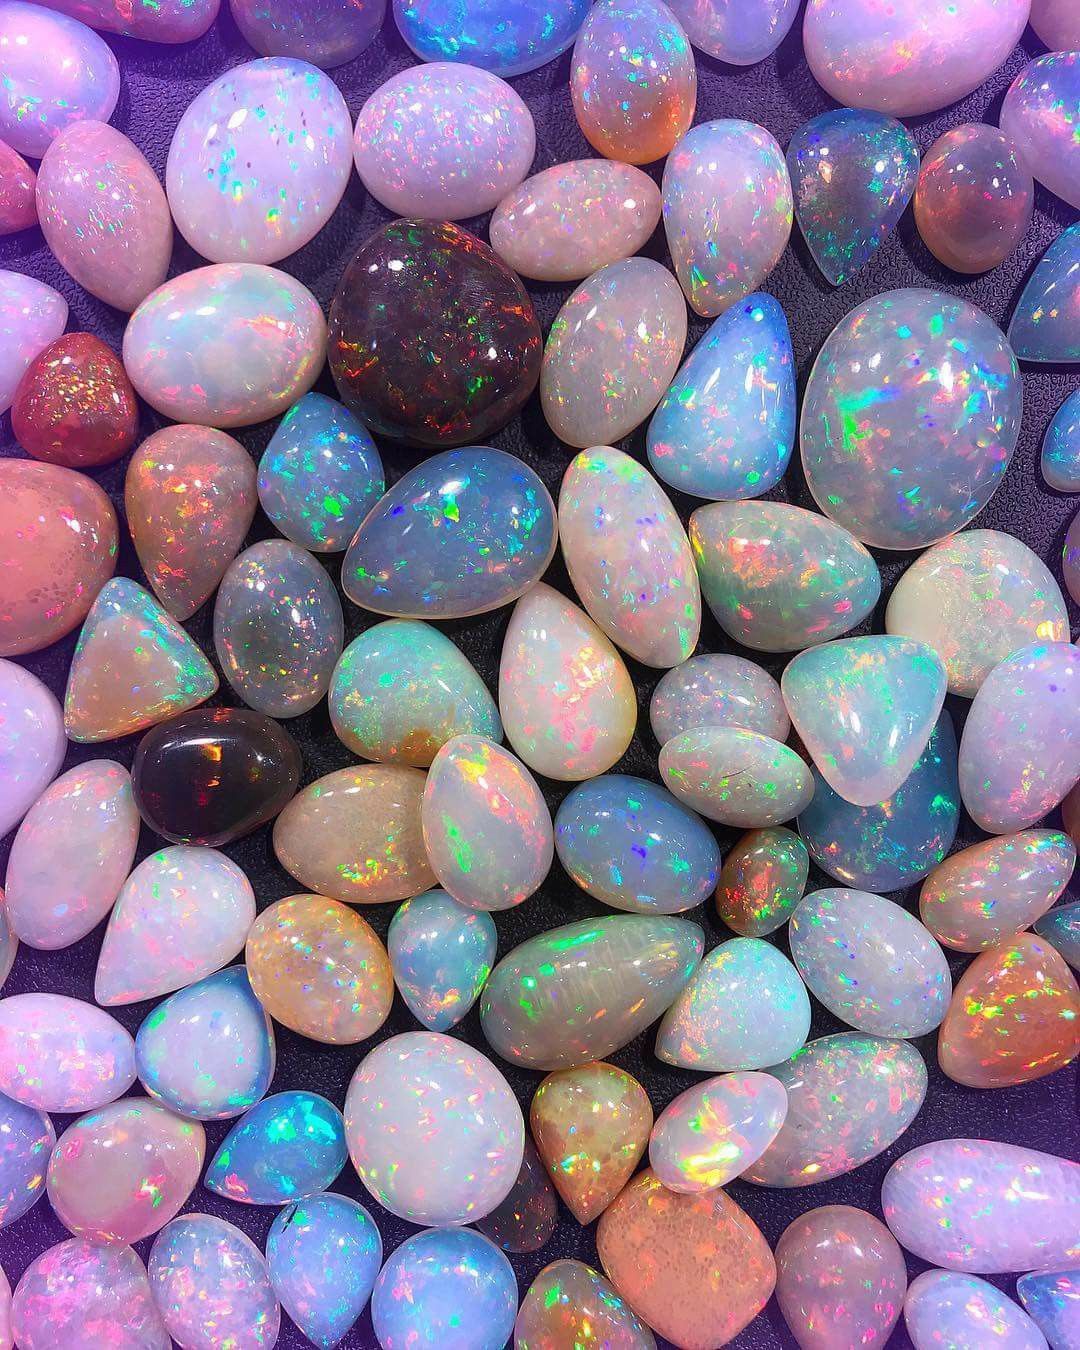 Opal wallpaper. Crystals store, Crystal aesthetic, Stones and crystals